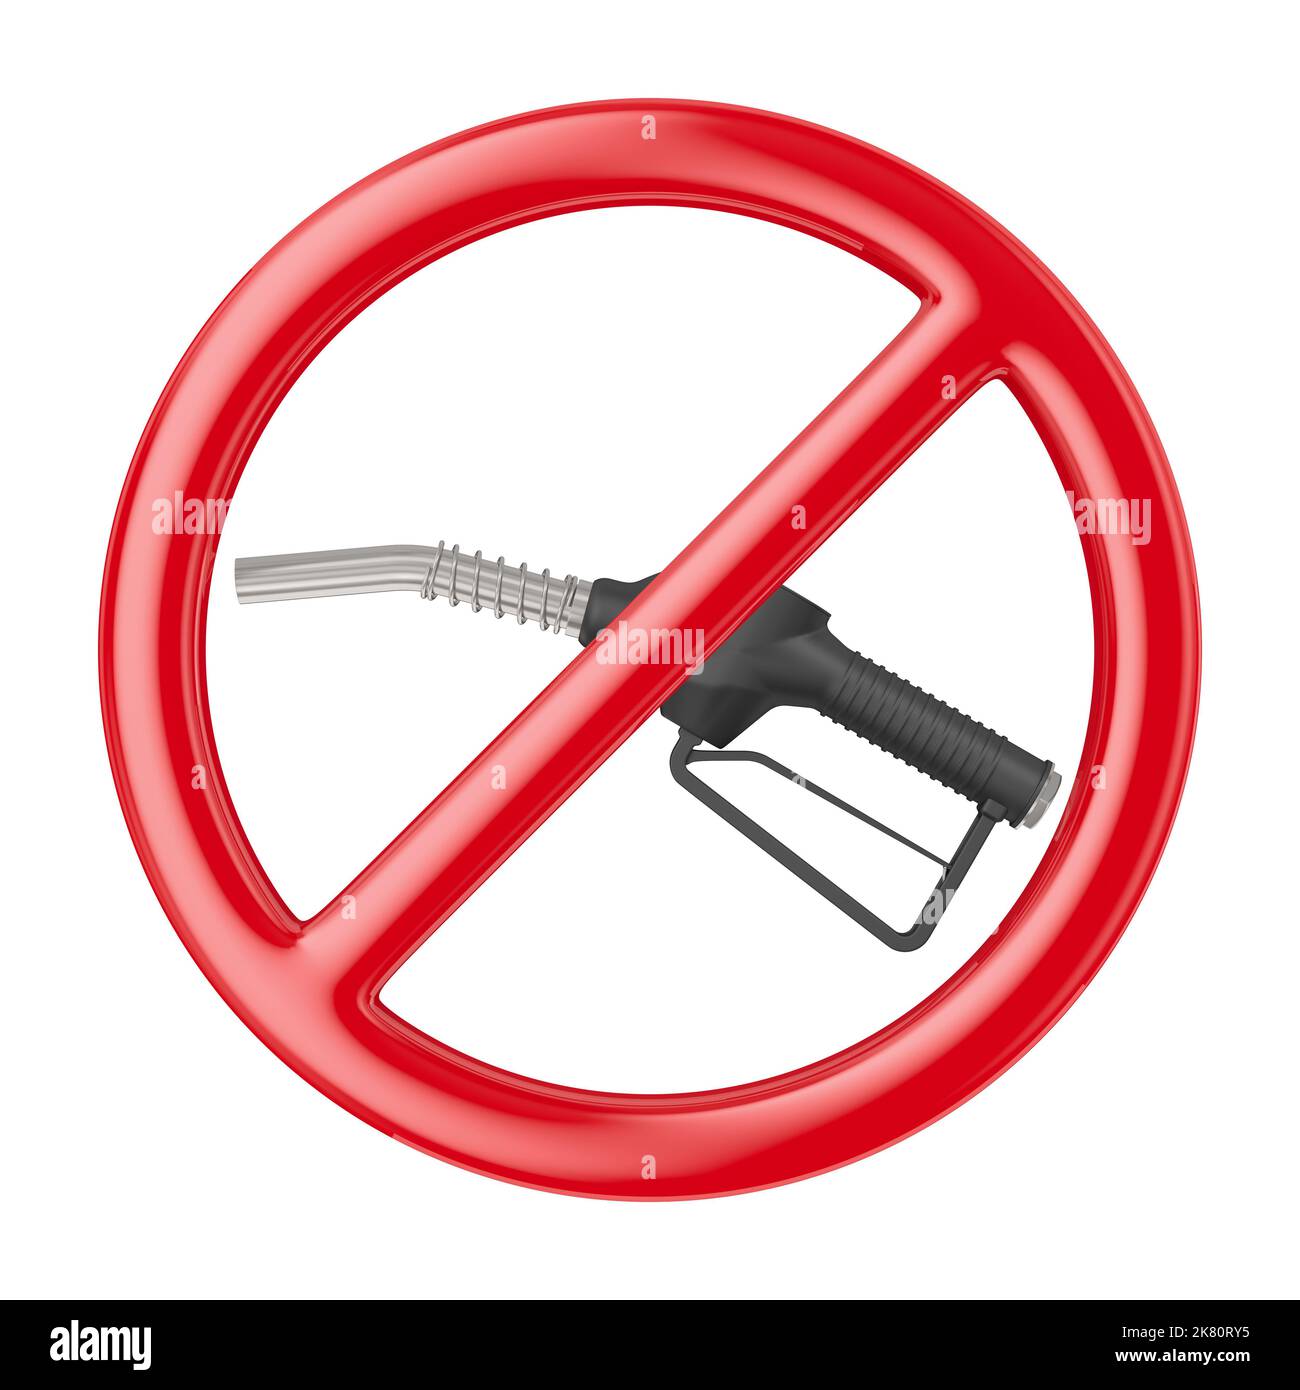 forbidden sign and nozzle fuel on white background. Isolated 3D illustration Stock Photo